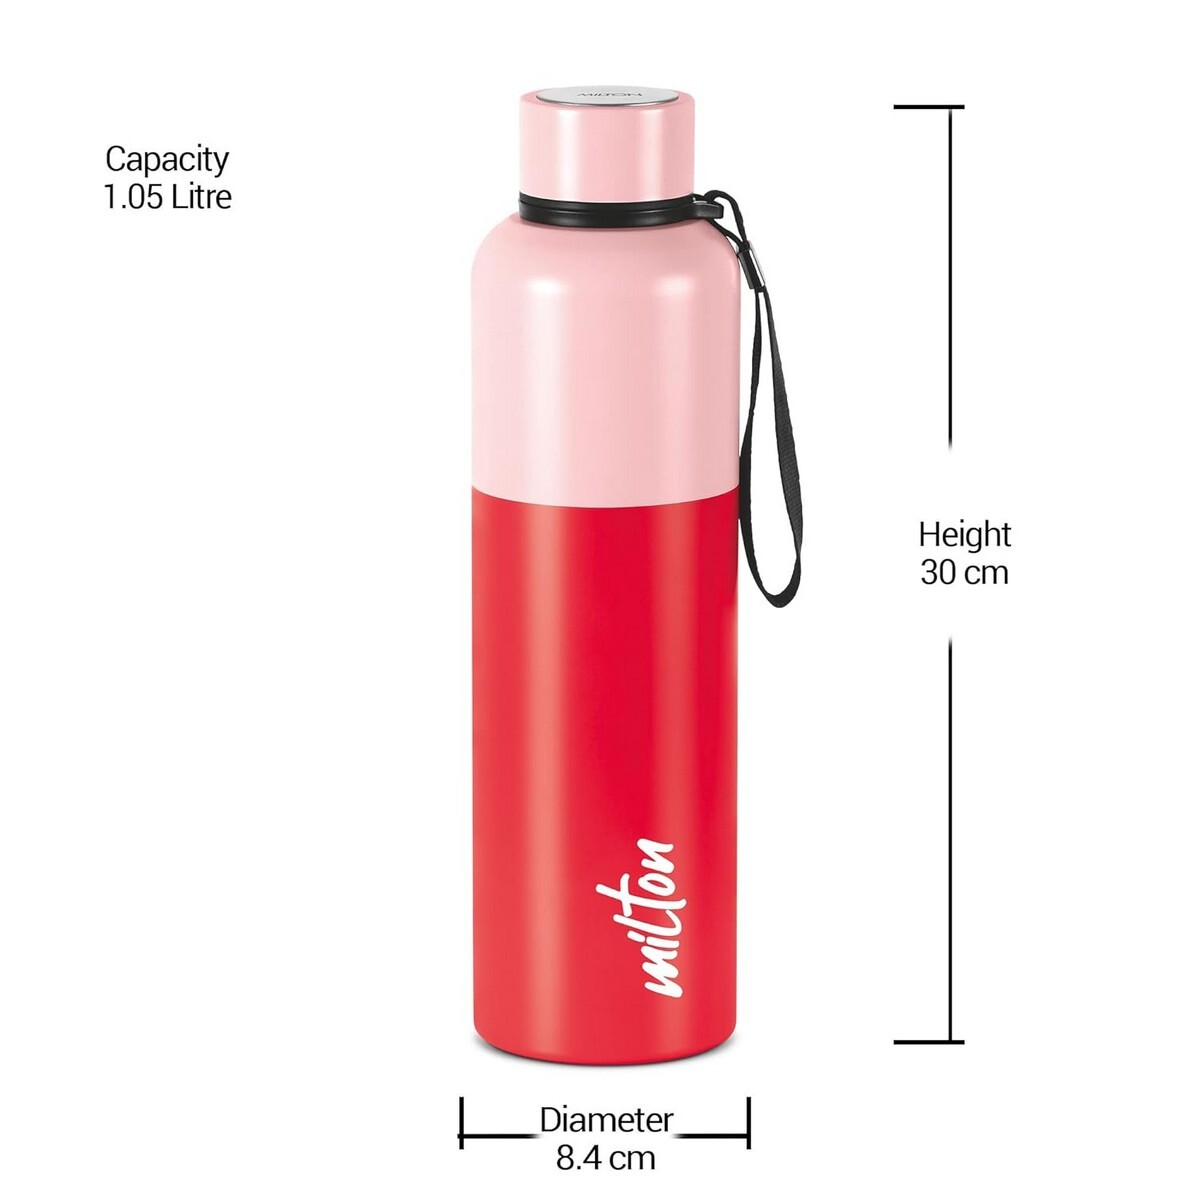 Milton Thermal Stainless Steel Flask Ancy 1000ml